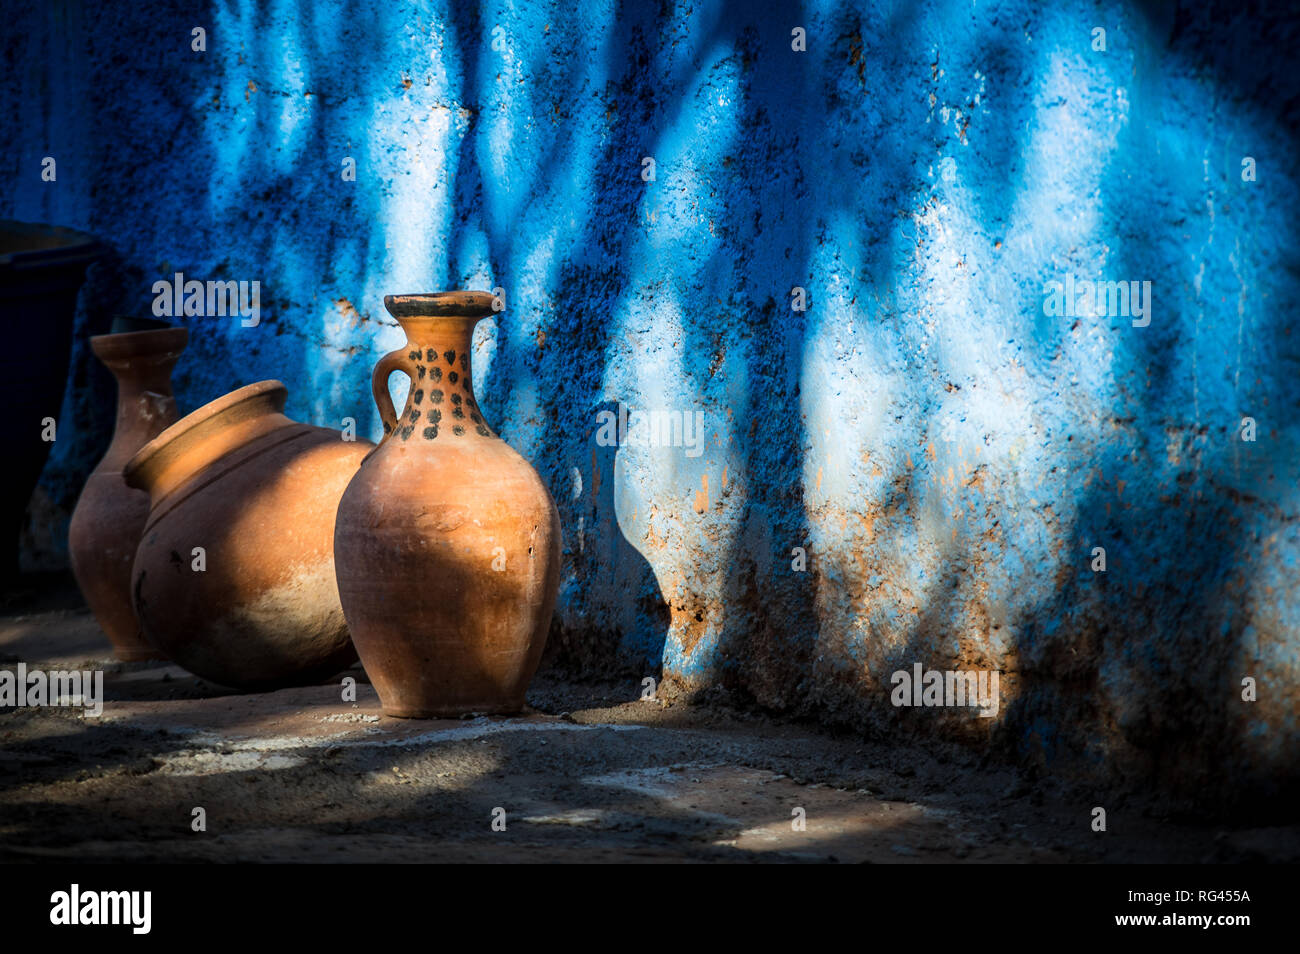 Pottery jars leaning against a blue wall Stock Photo